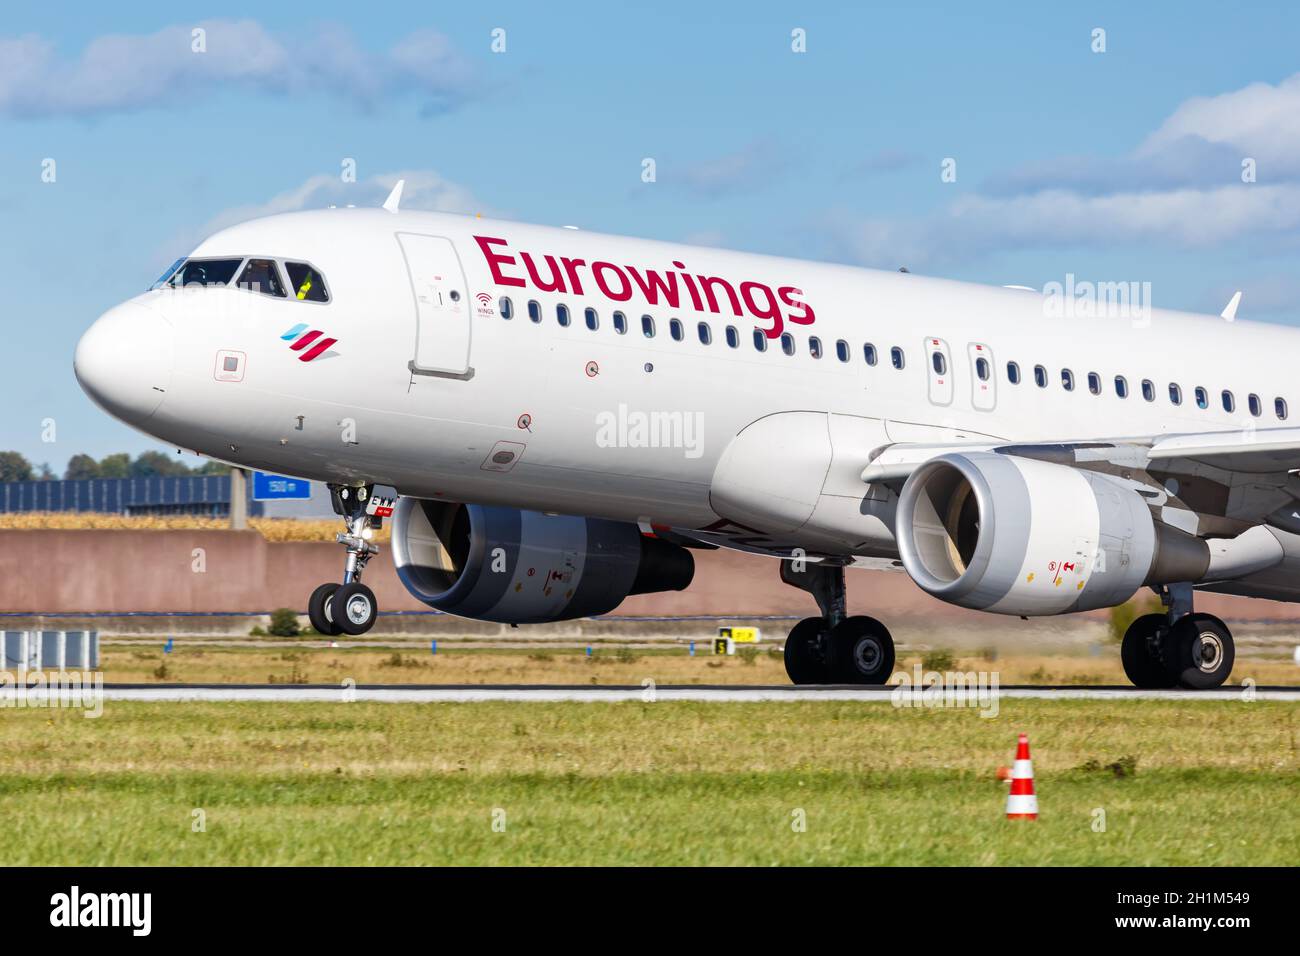 Stuttgart, Germany - October 4, 2020: Eurowings Airbus A320 airplane at Stuttgart Airport in Germany. Airbus is a European aircraft manufacturer based Stock Photo